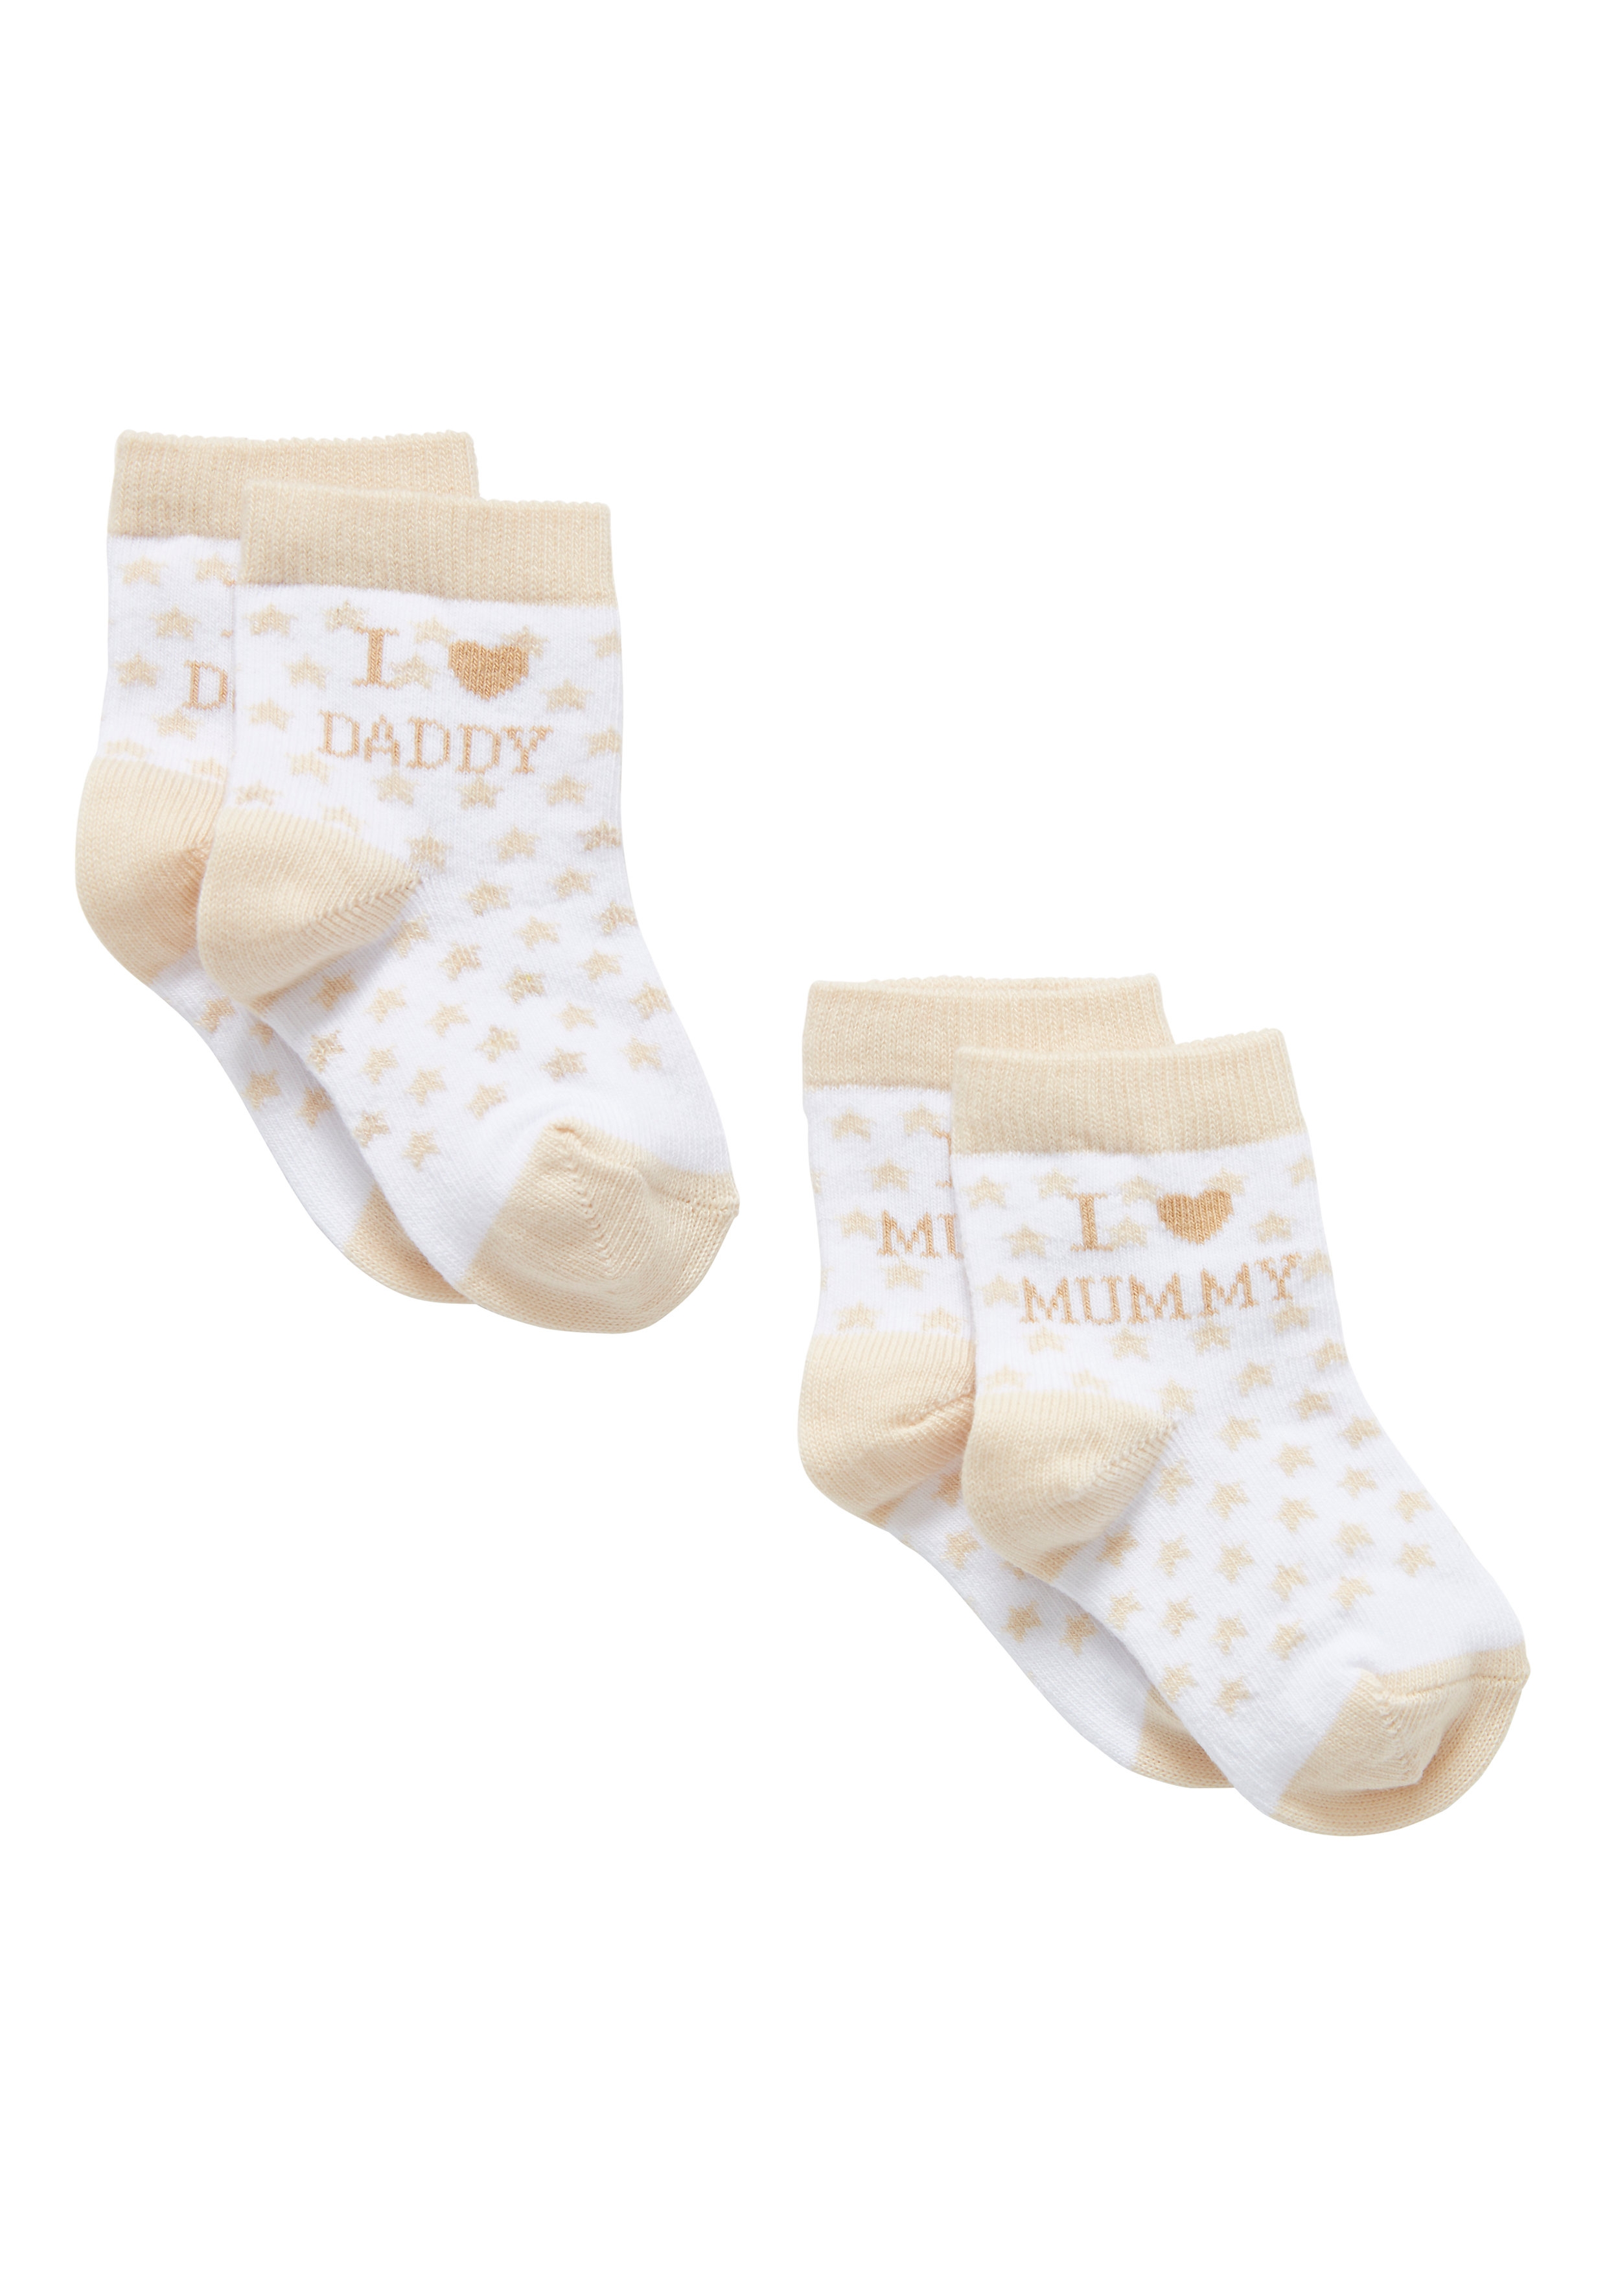 Mothercare | Boys Mummy And Daddy Socks - 2 Pack - Beige